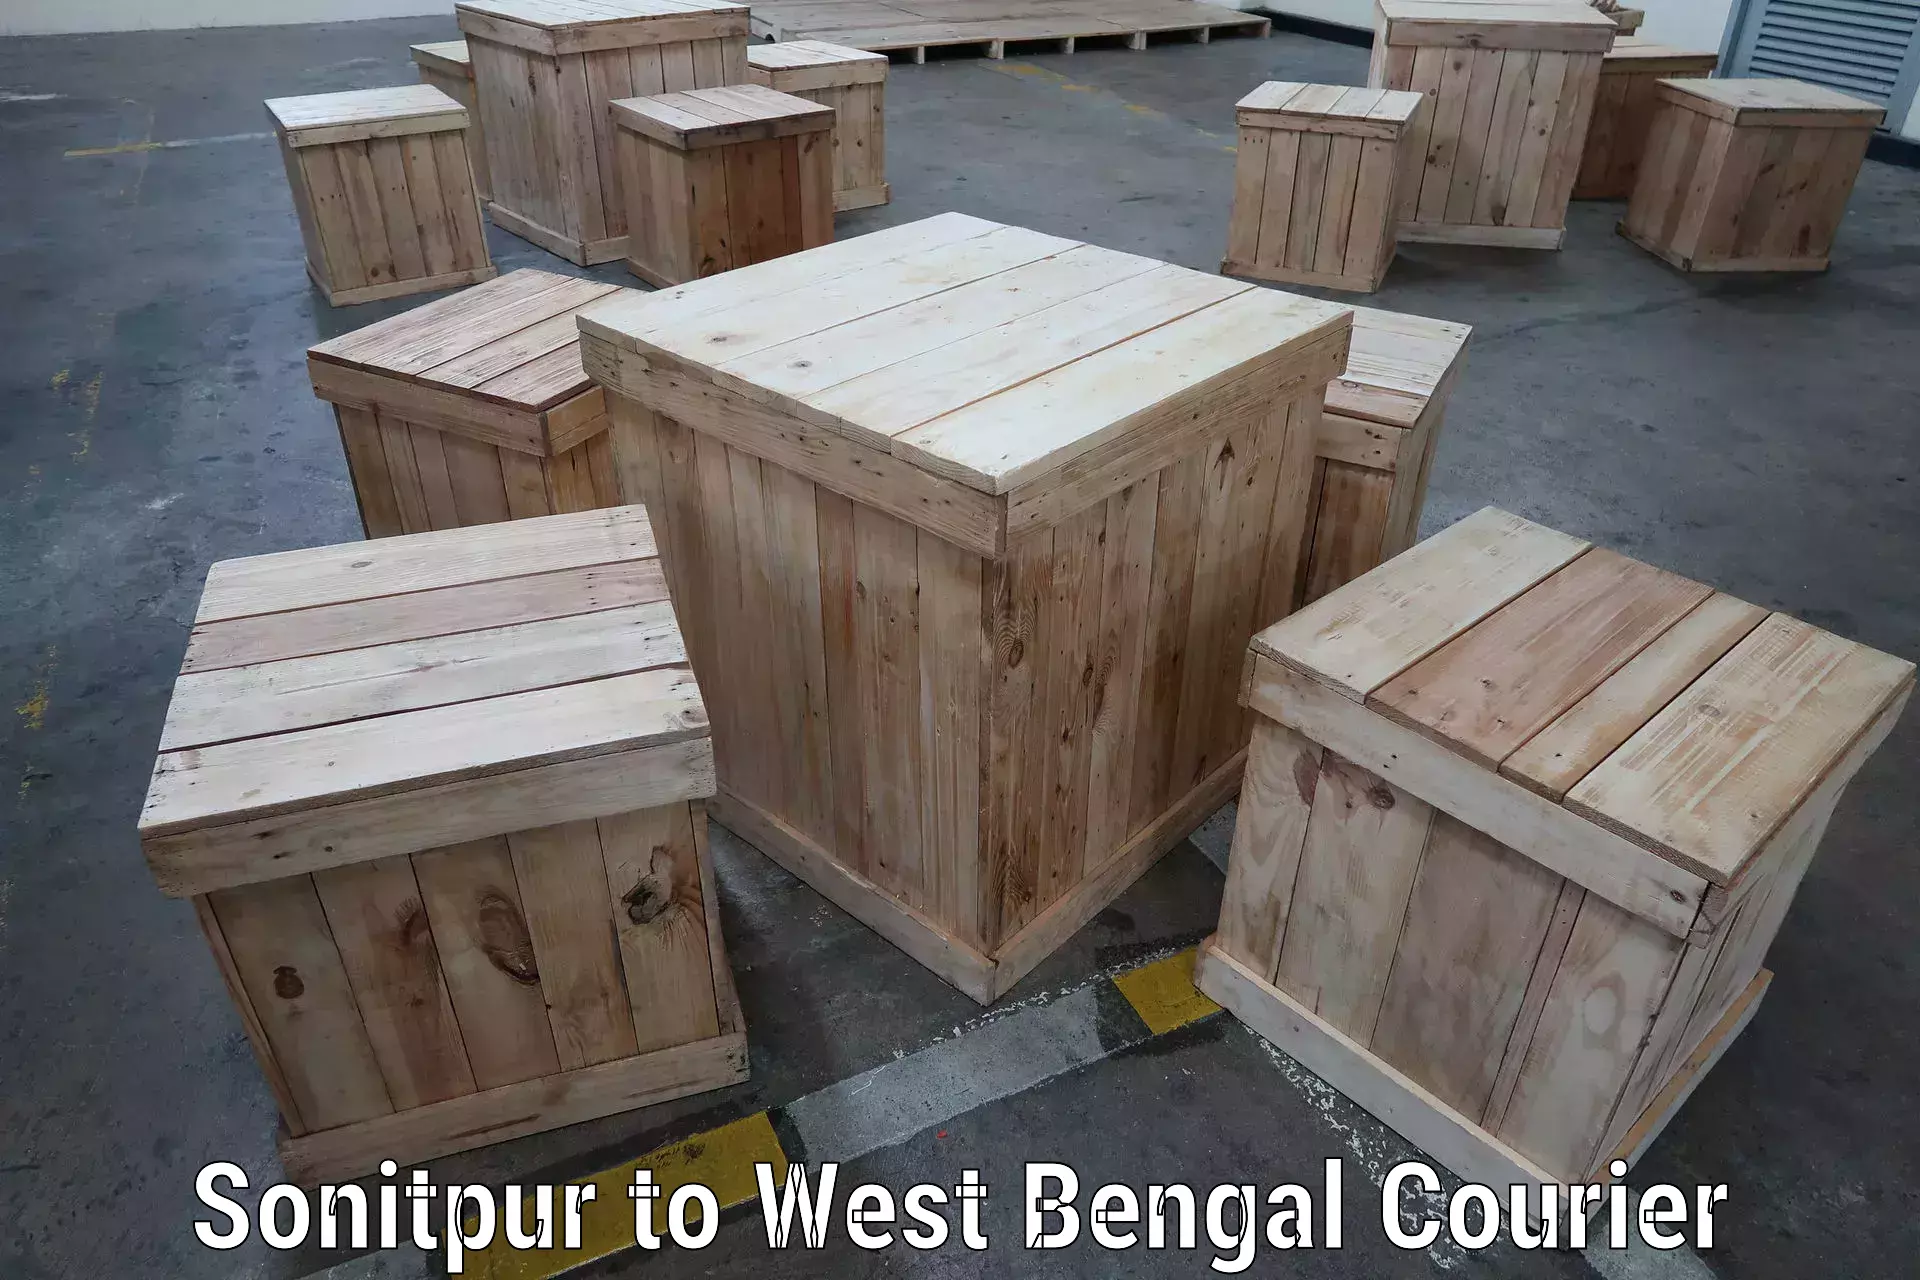 High-performance logistics Sonitpur to West Bengal